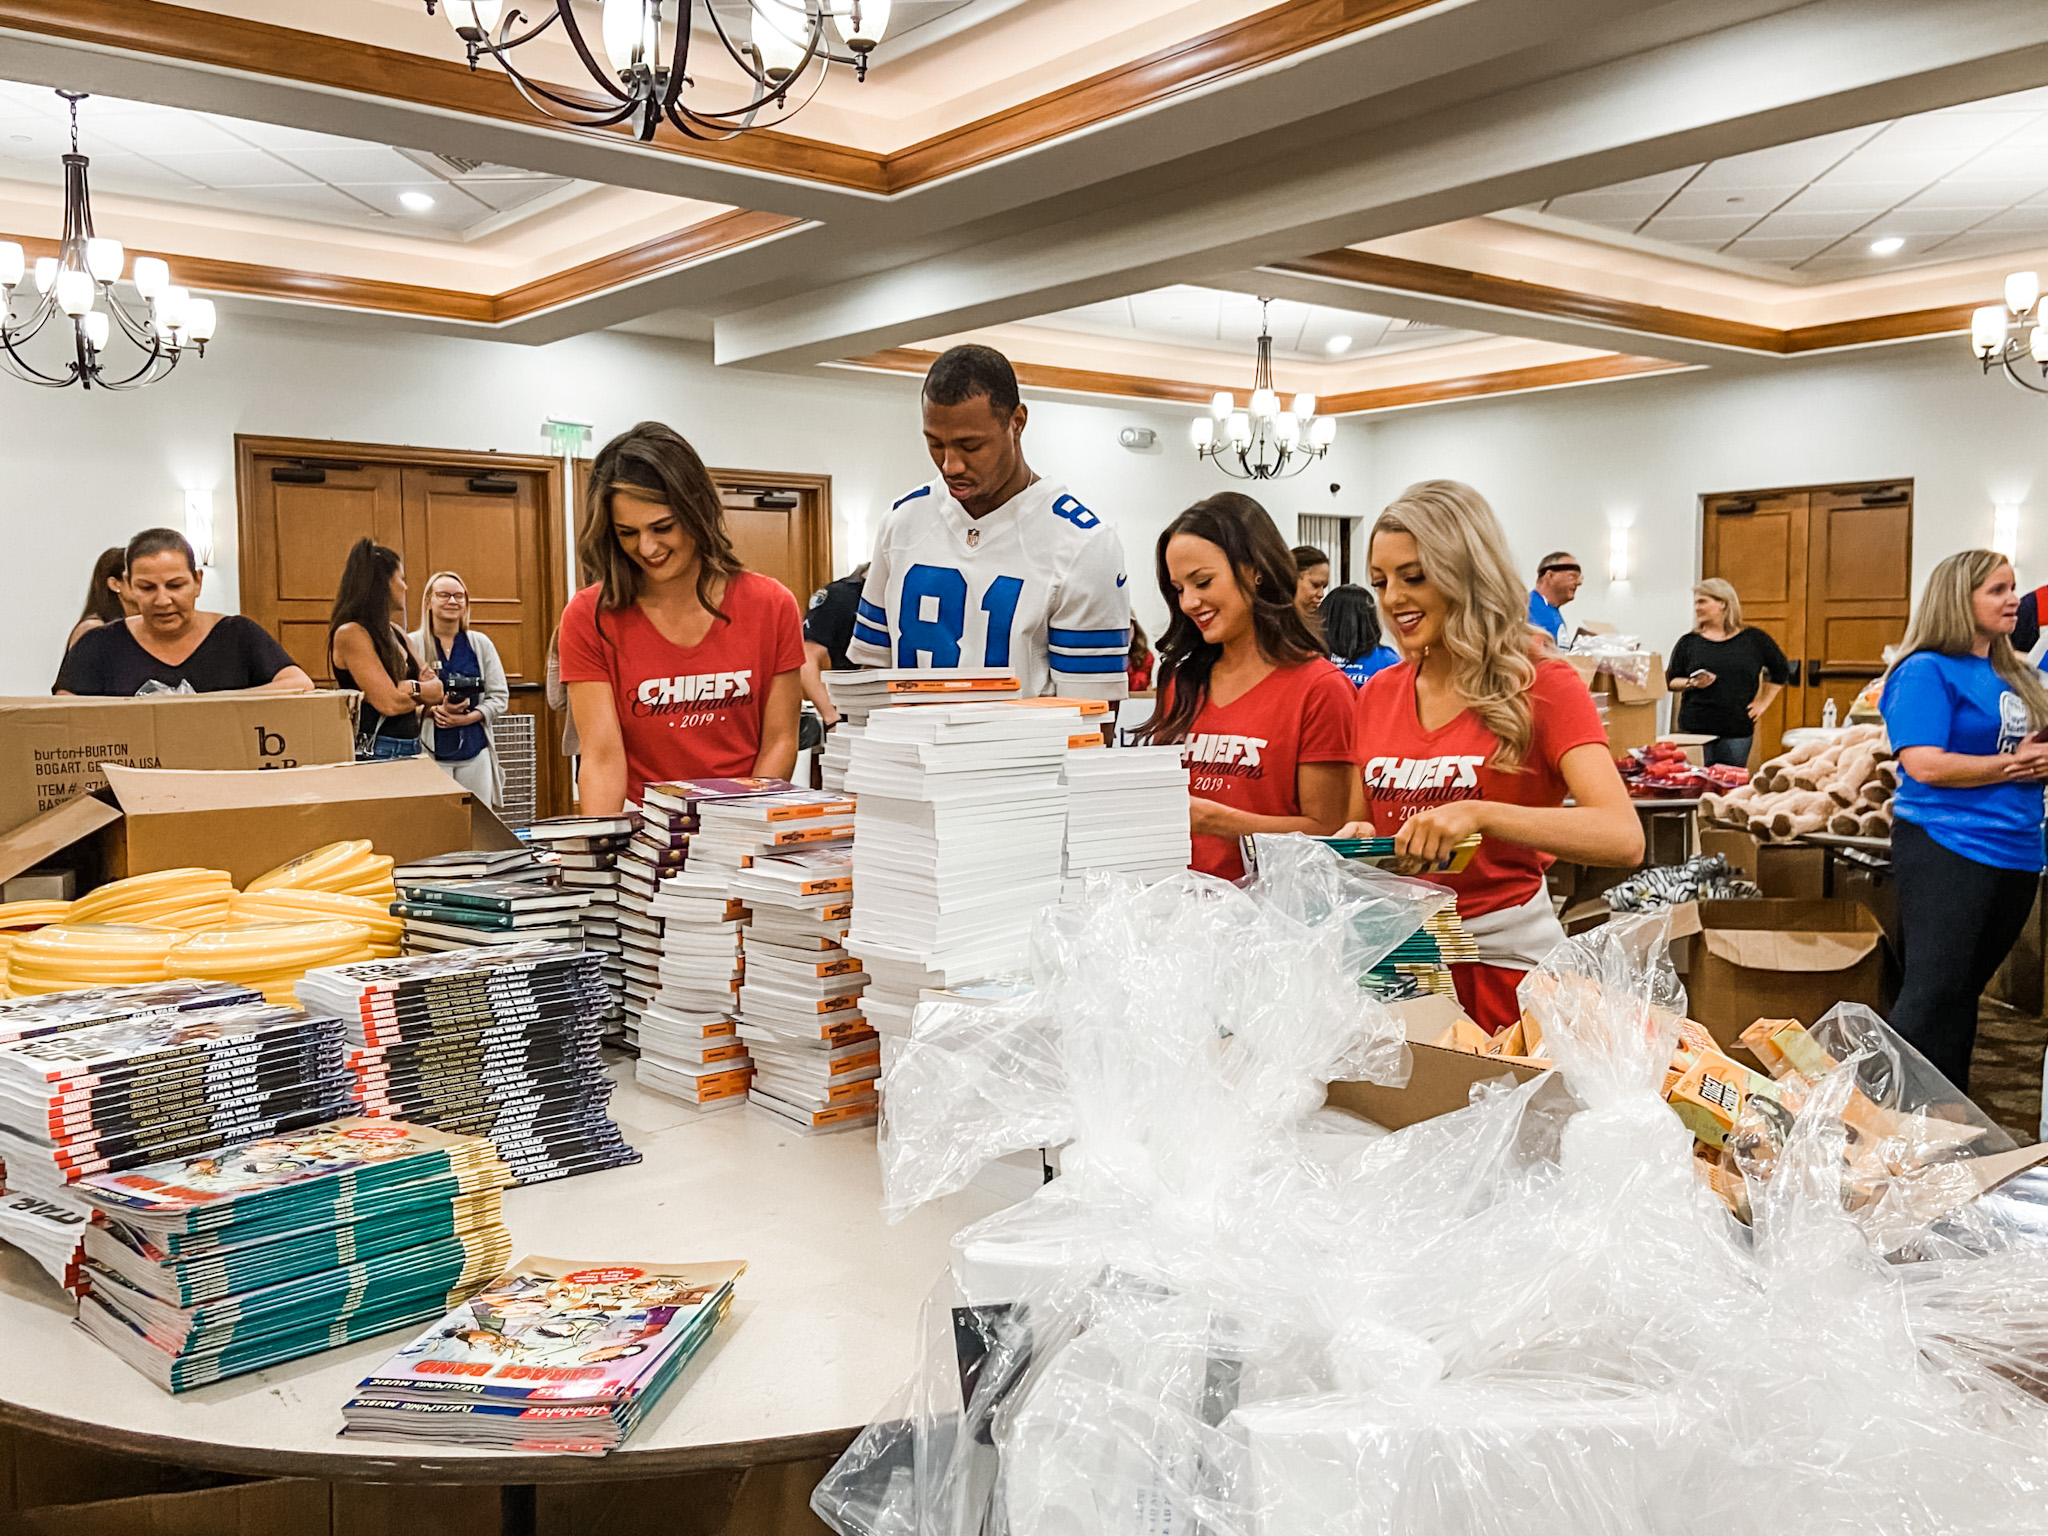 Former NFL Player Laurent Robinson and cheerleaders from the Kansas City Chiefs assemble baskets at Parkland Golf & Country Club. With Super Bowl Cheerleaders